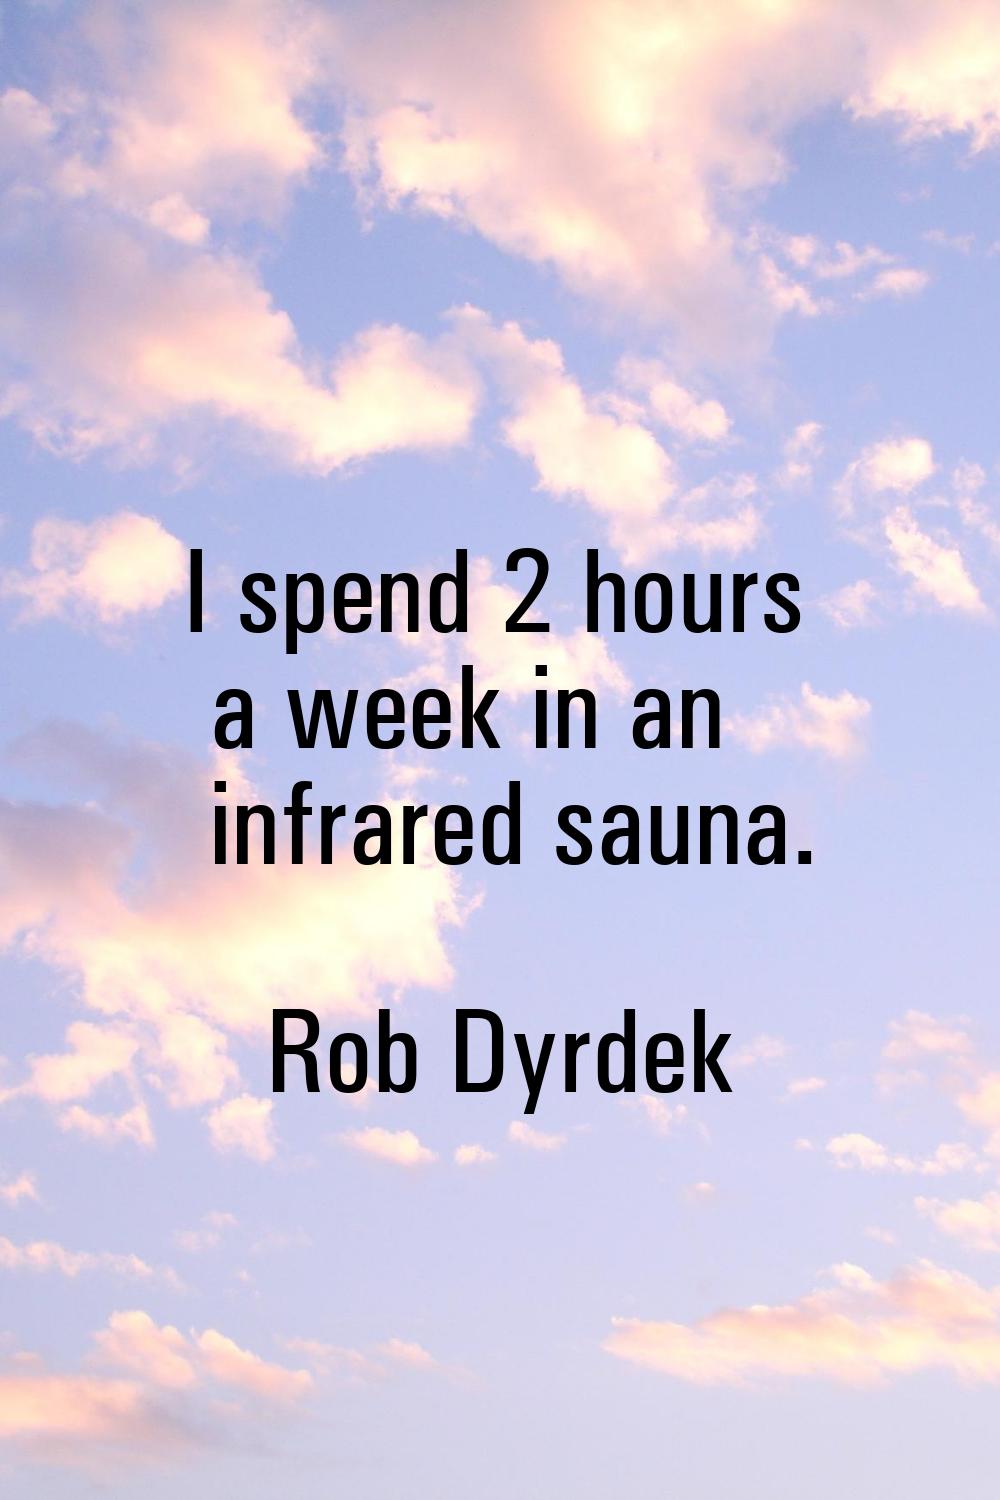 I spend 2 hours a week in an infrared sauna.